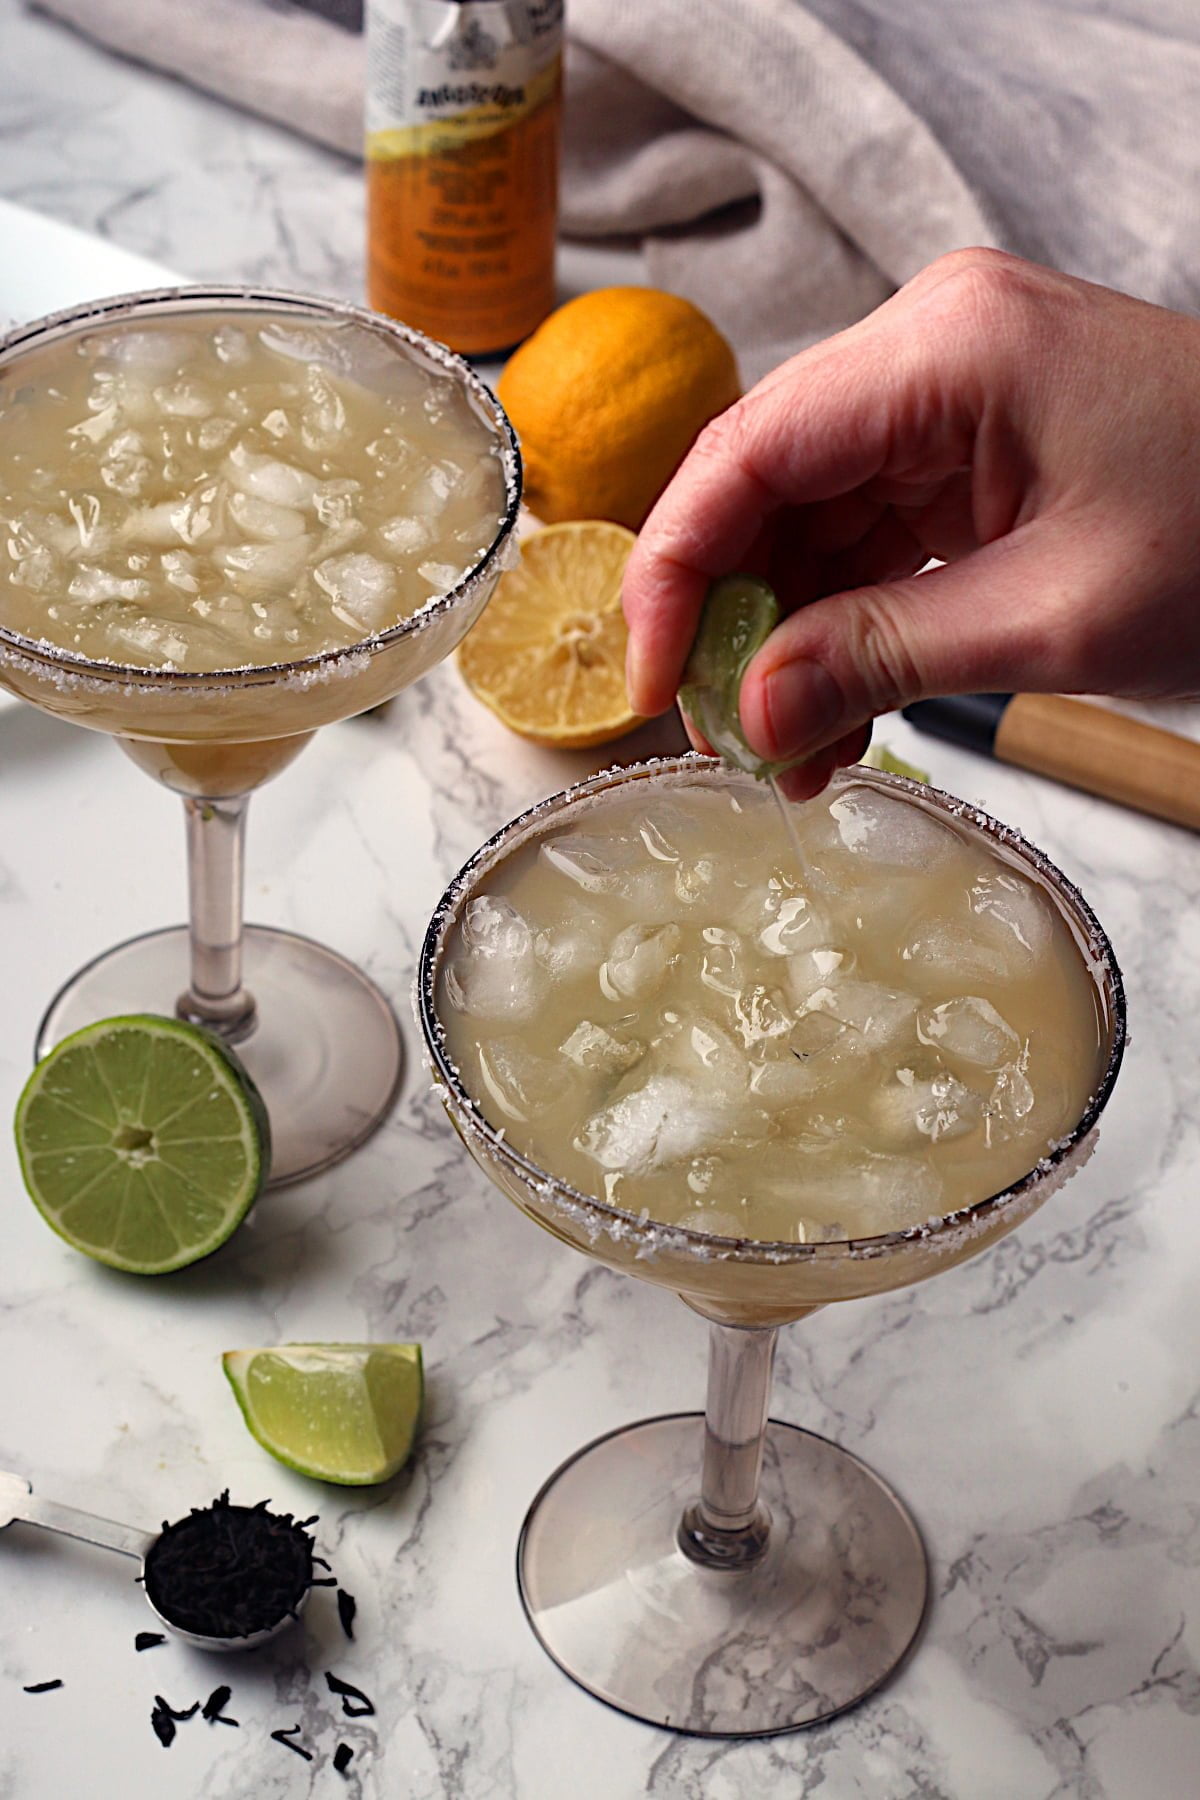 A hand squeezing lime juice into a non-alcoholic lime margarita.